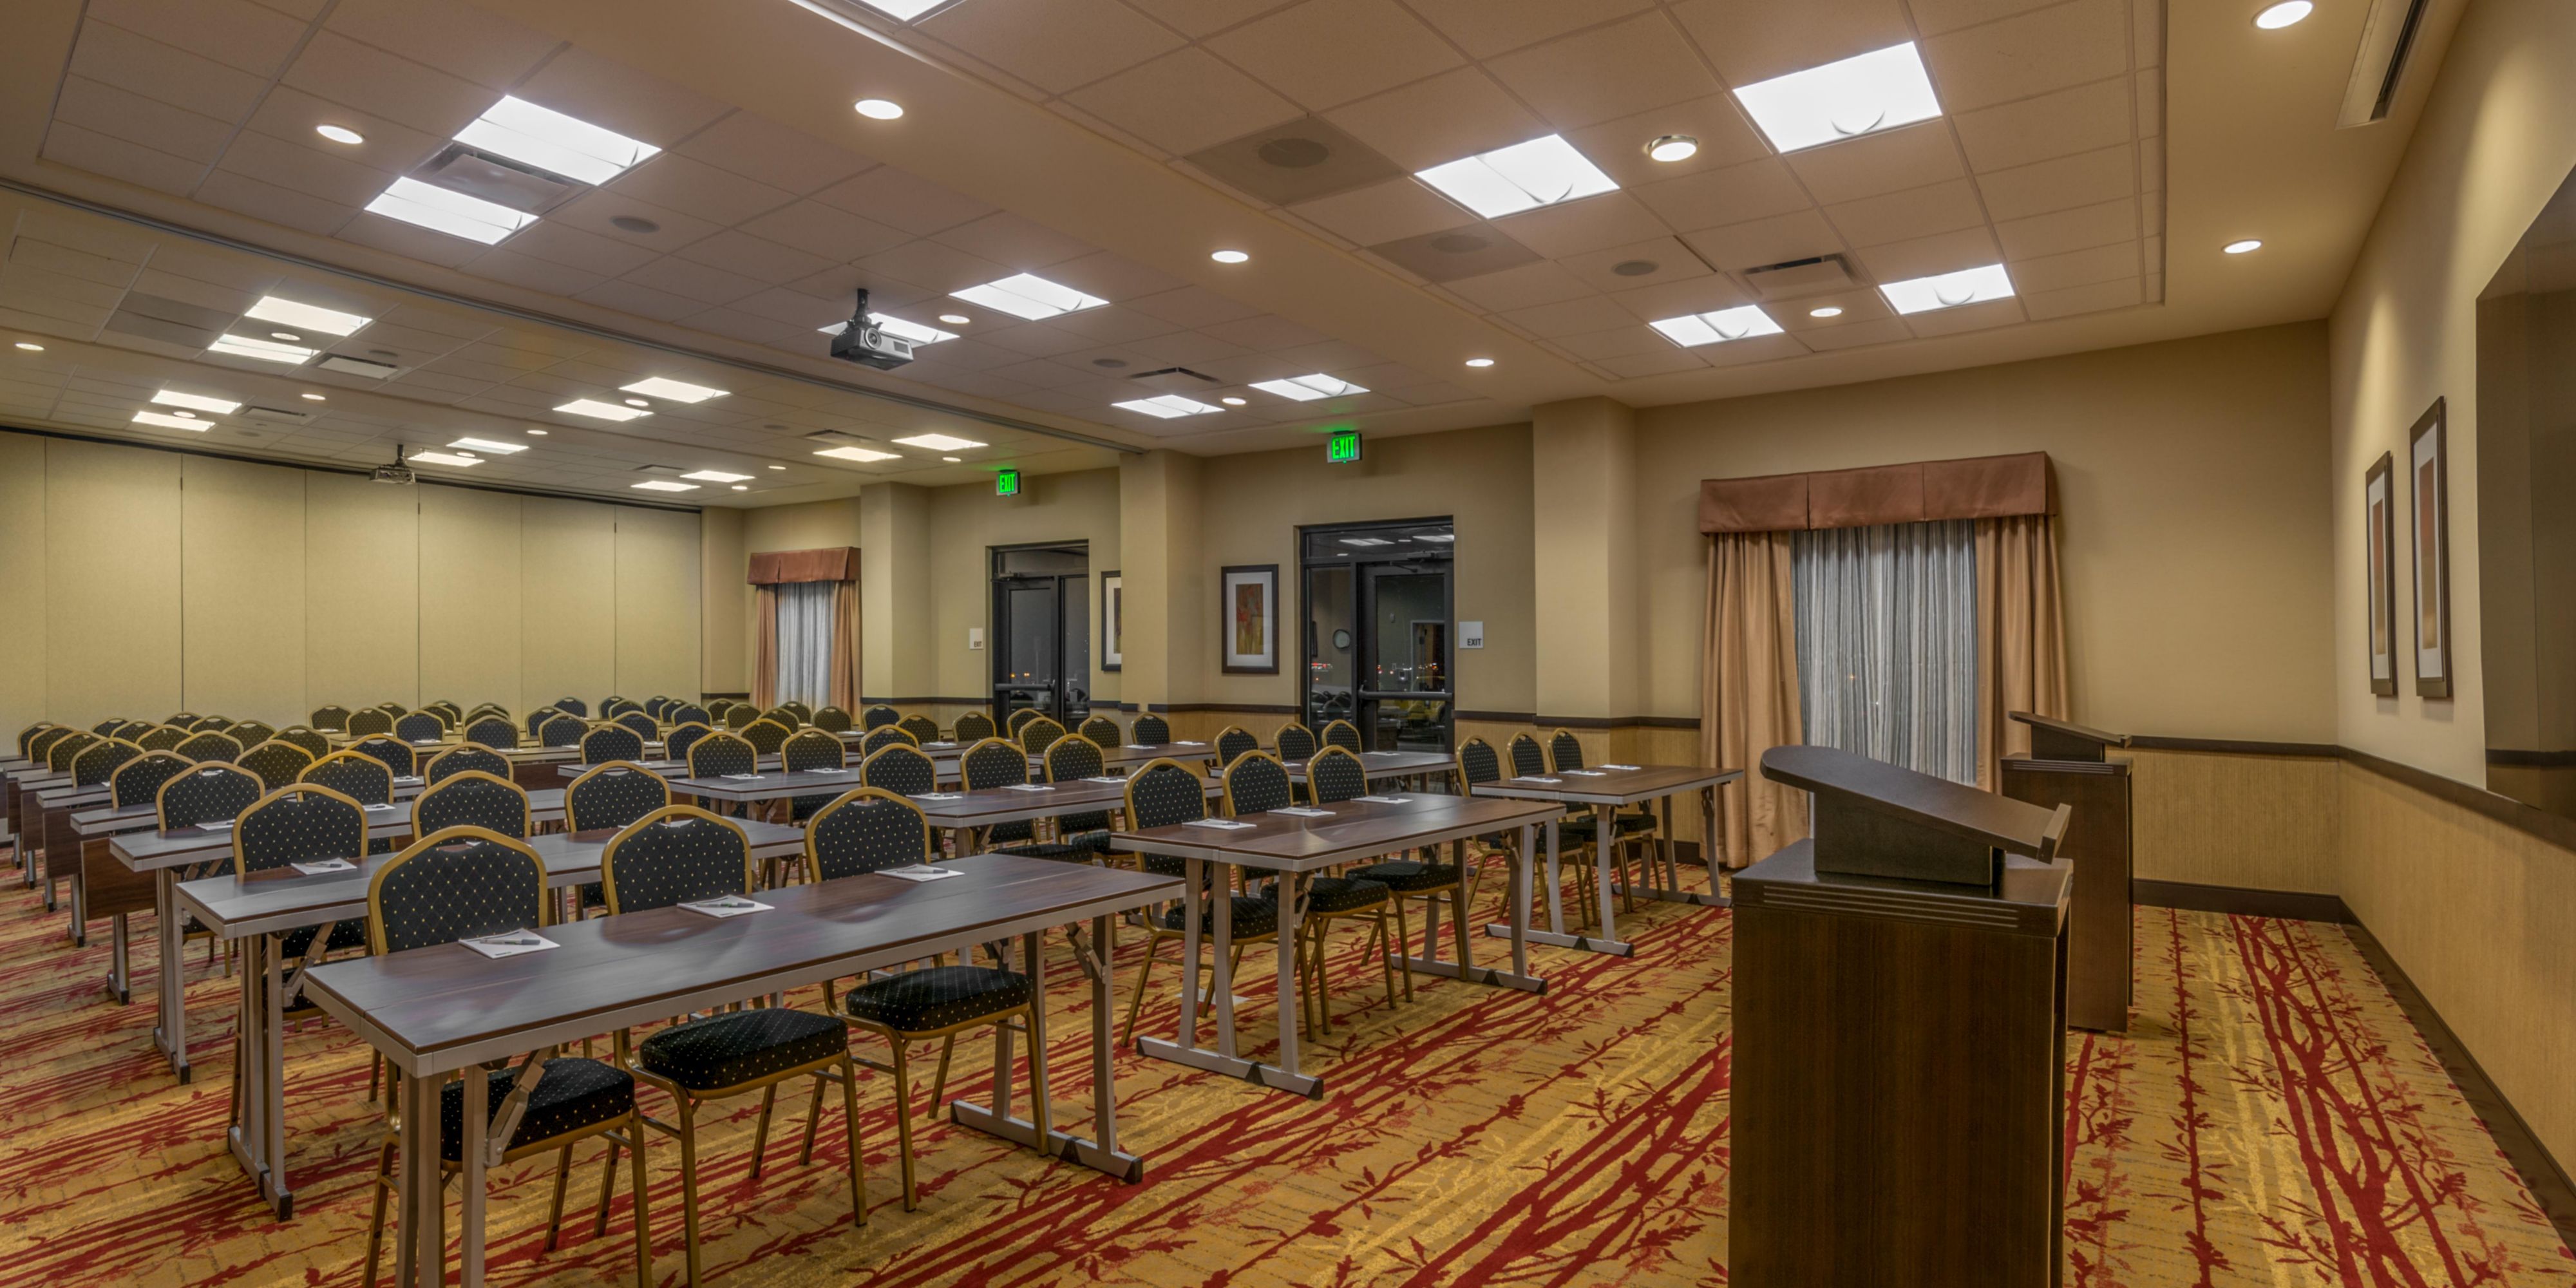 We have several different options when it comes to meeting space. Under the current "Stay at Home" order and making sure we are following social distancing guidelines, our meeting space has a maximum capacity of 10 people in the Meadows and/or Founders Rooms and 6 people in our Plum Room. 